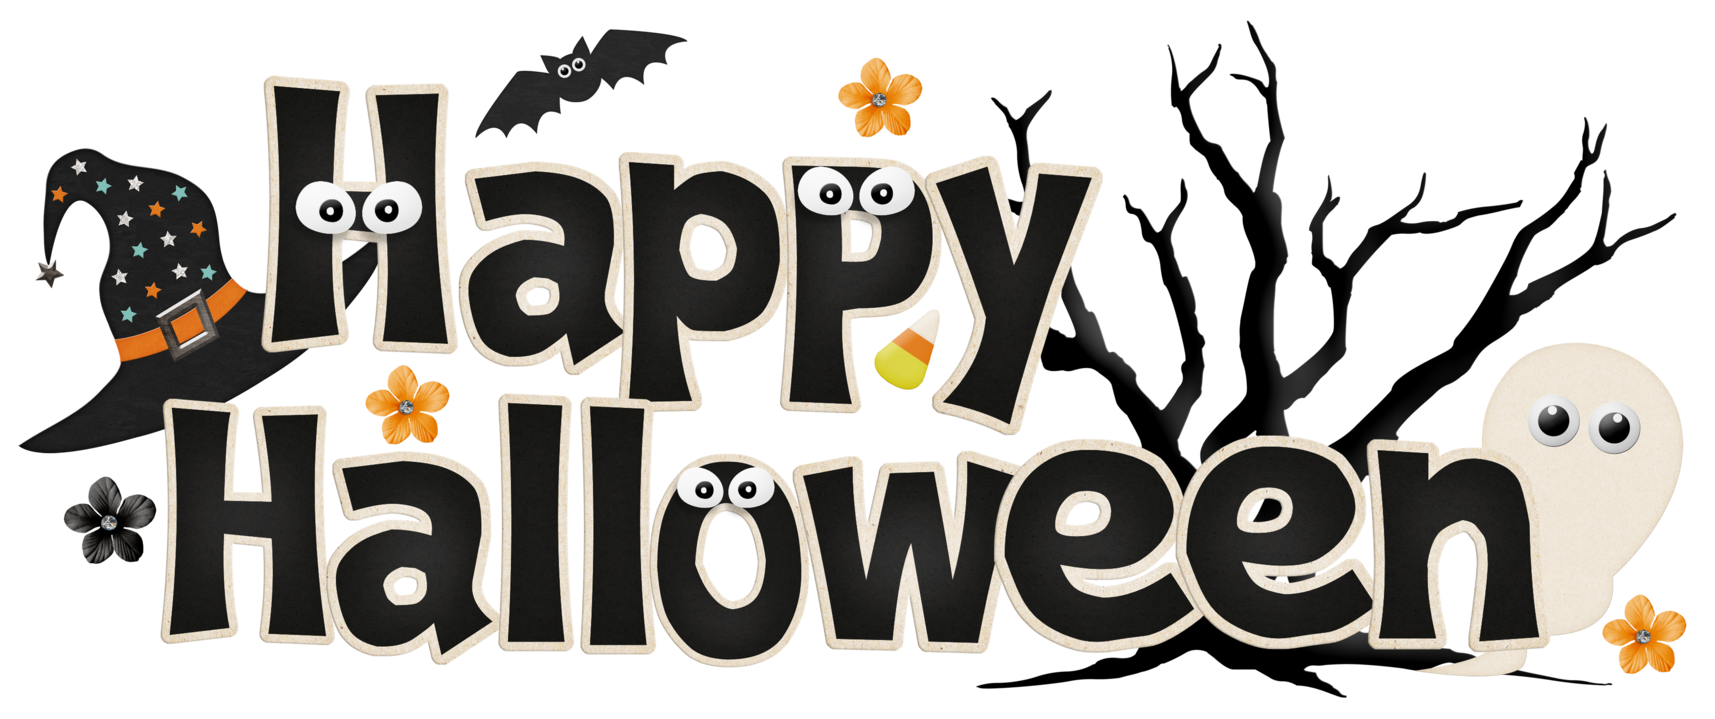 Halloween Banner PNG Background Image